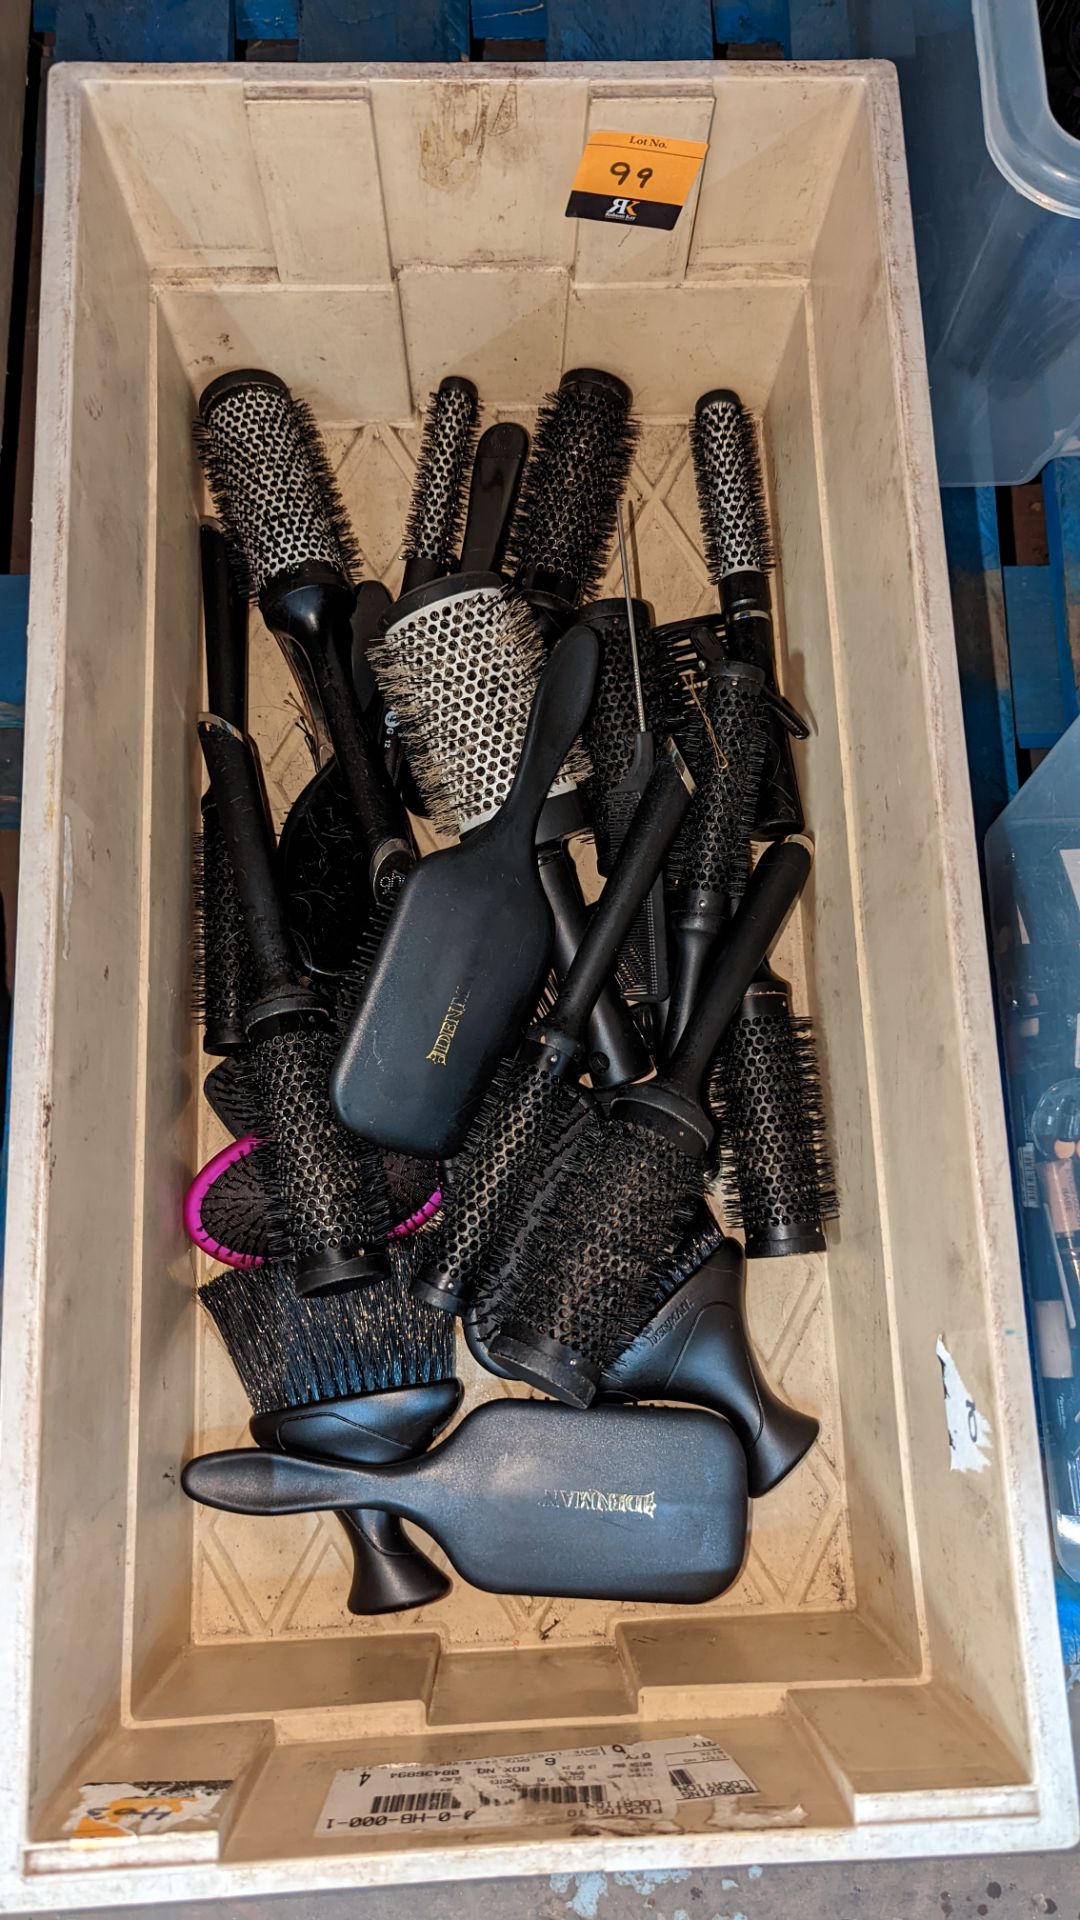 Contents of a crate of hairbrushes & similar - crate excluded - Image 4 of 4